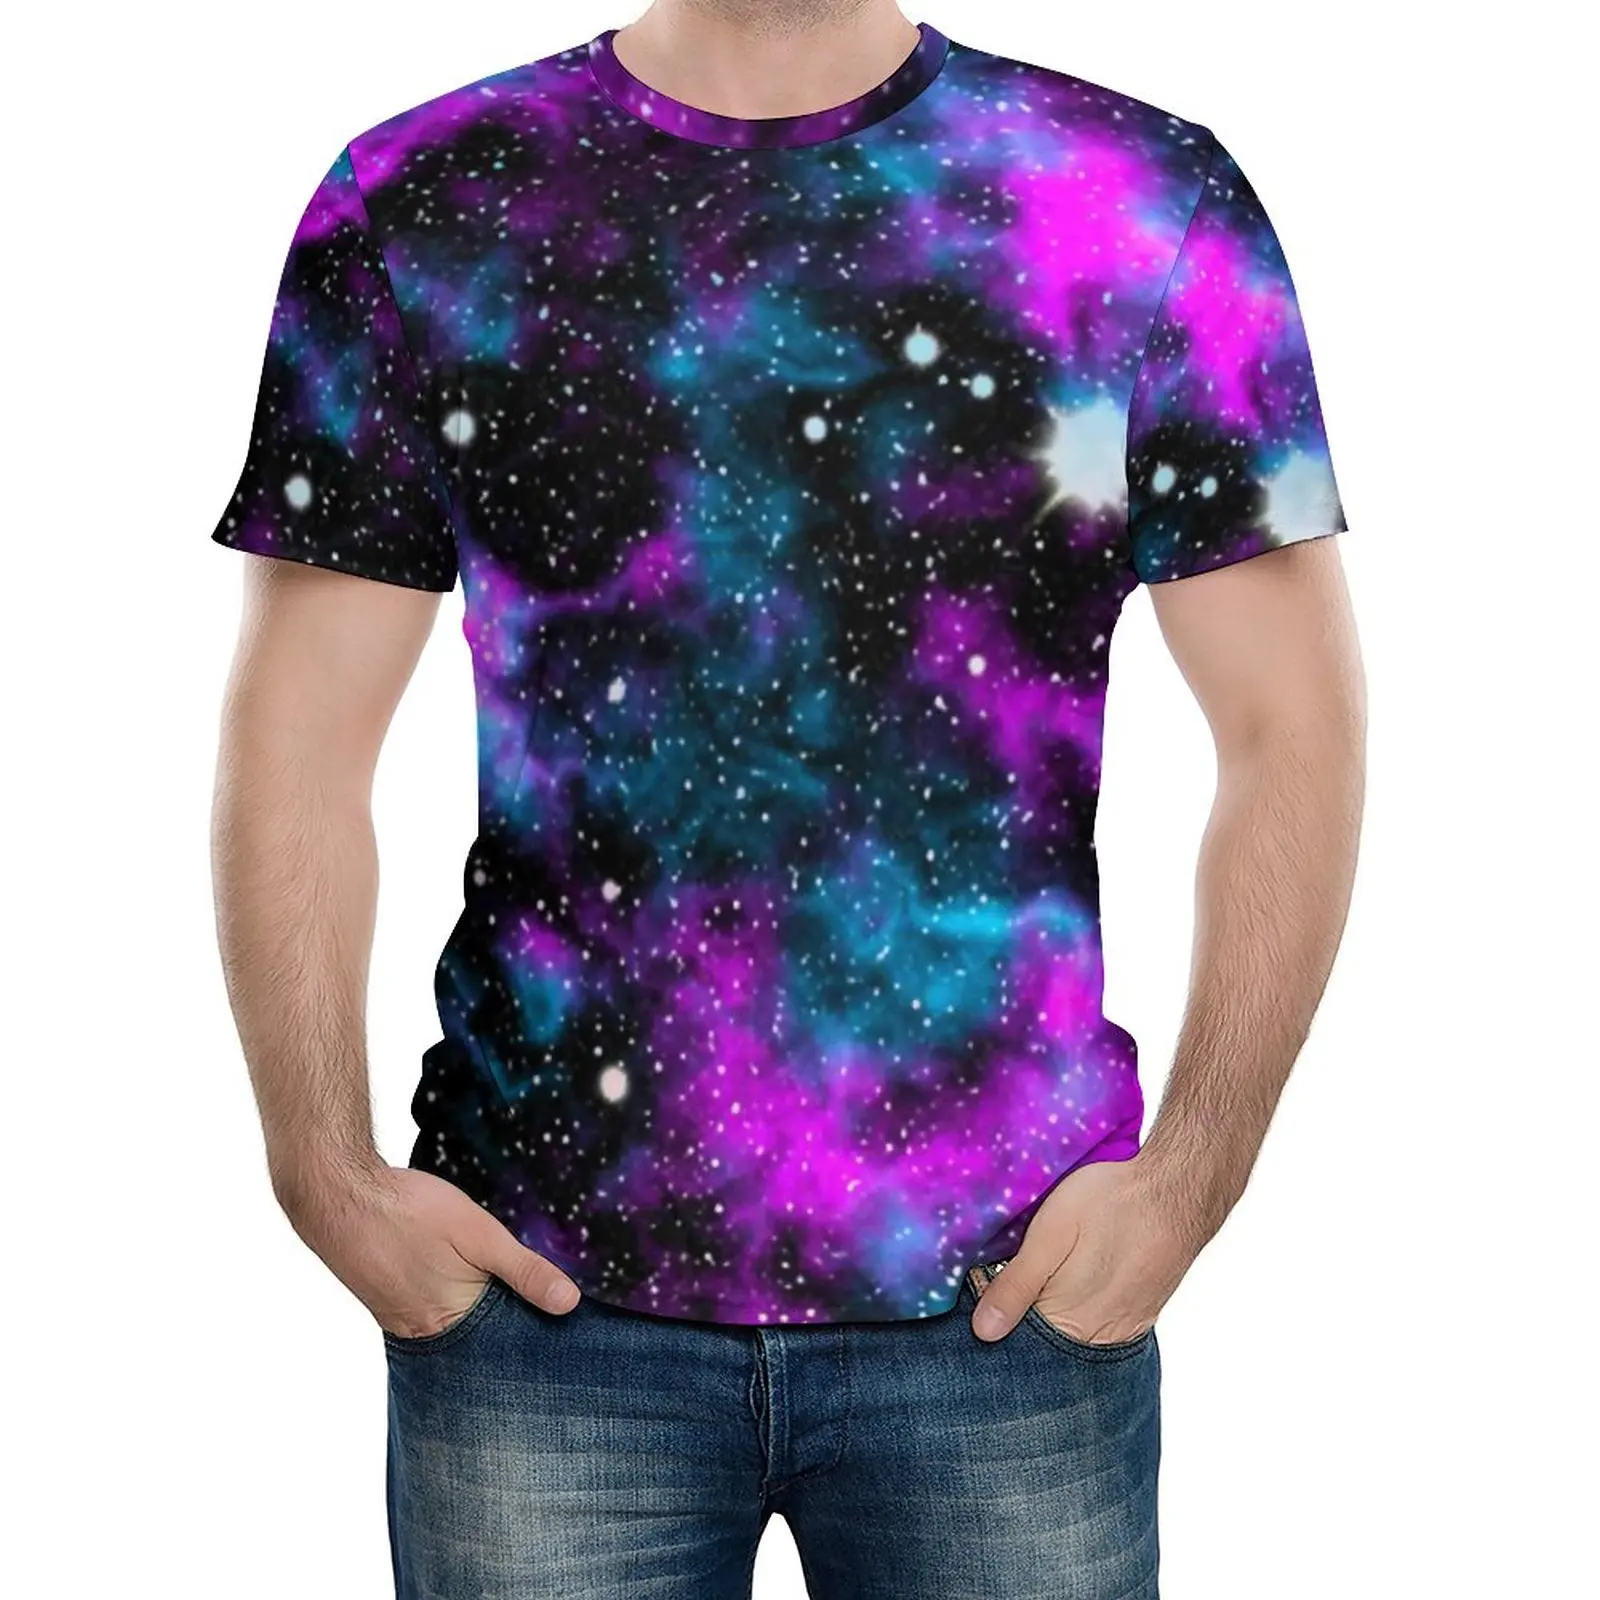 

Blue And Purple Galaxy T-Shirt Cosmic Neon Print Awesome T-Shirts O-Neck Popular Tshirt Summer Couple Design Tops Plus Size